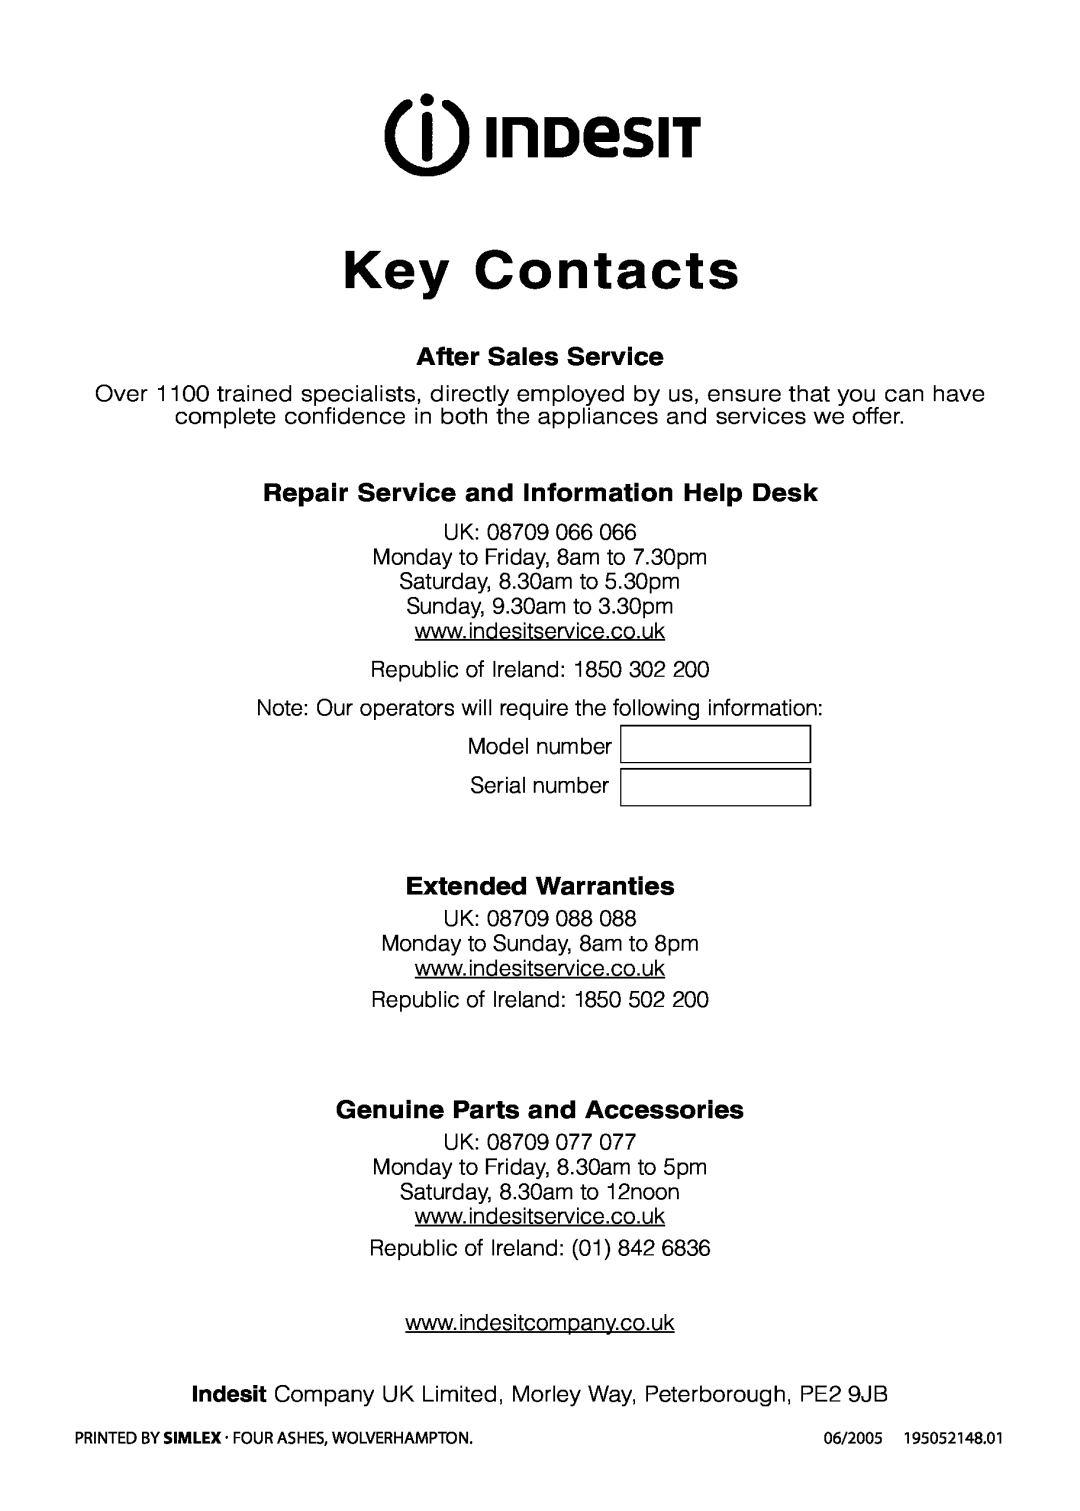 Indesit KP100IX manual Key Contacts, After Sales Service, Repair Service and Information Help Desk, Extended Warranties 